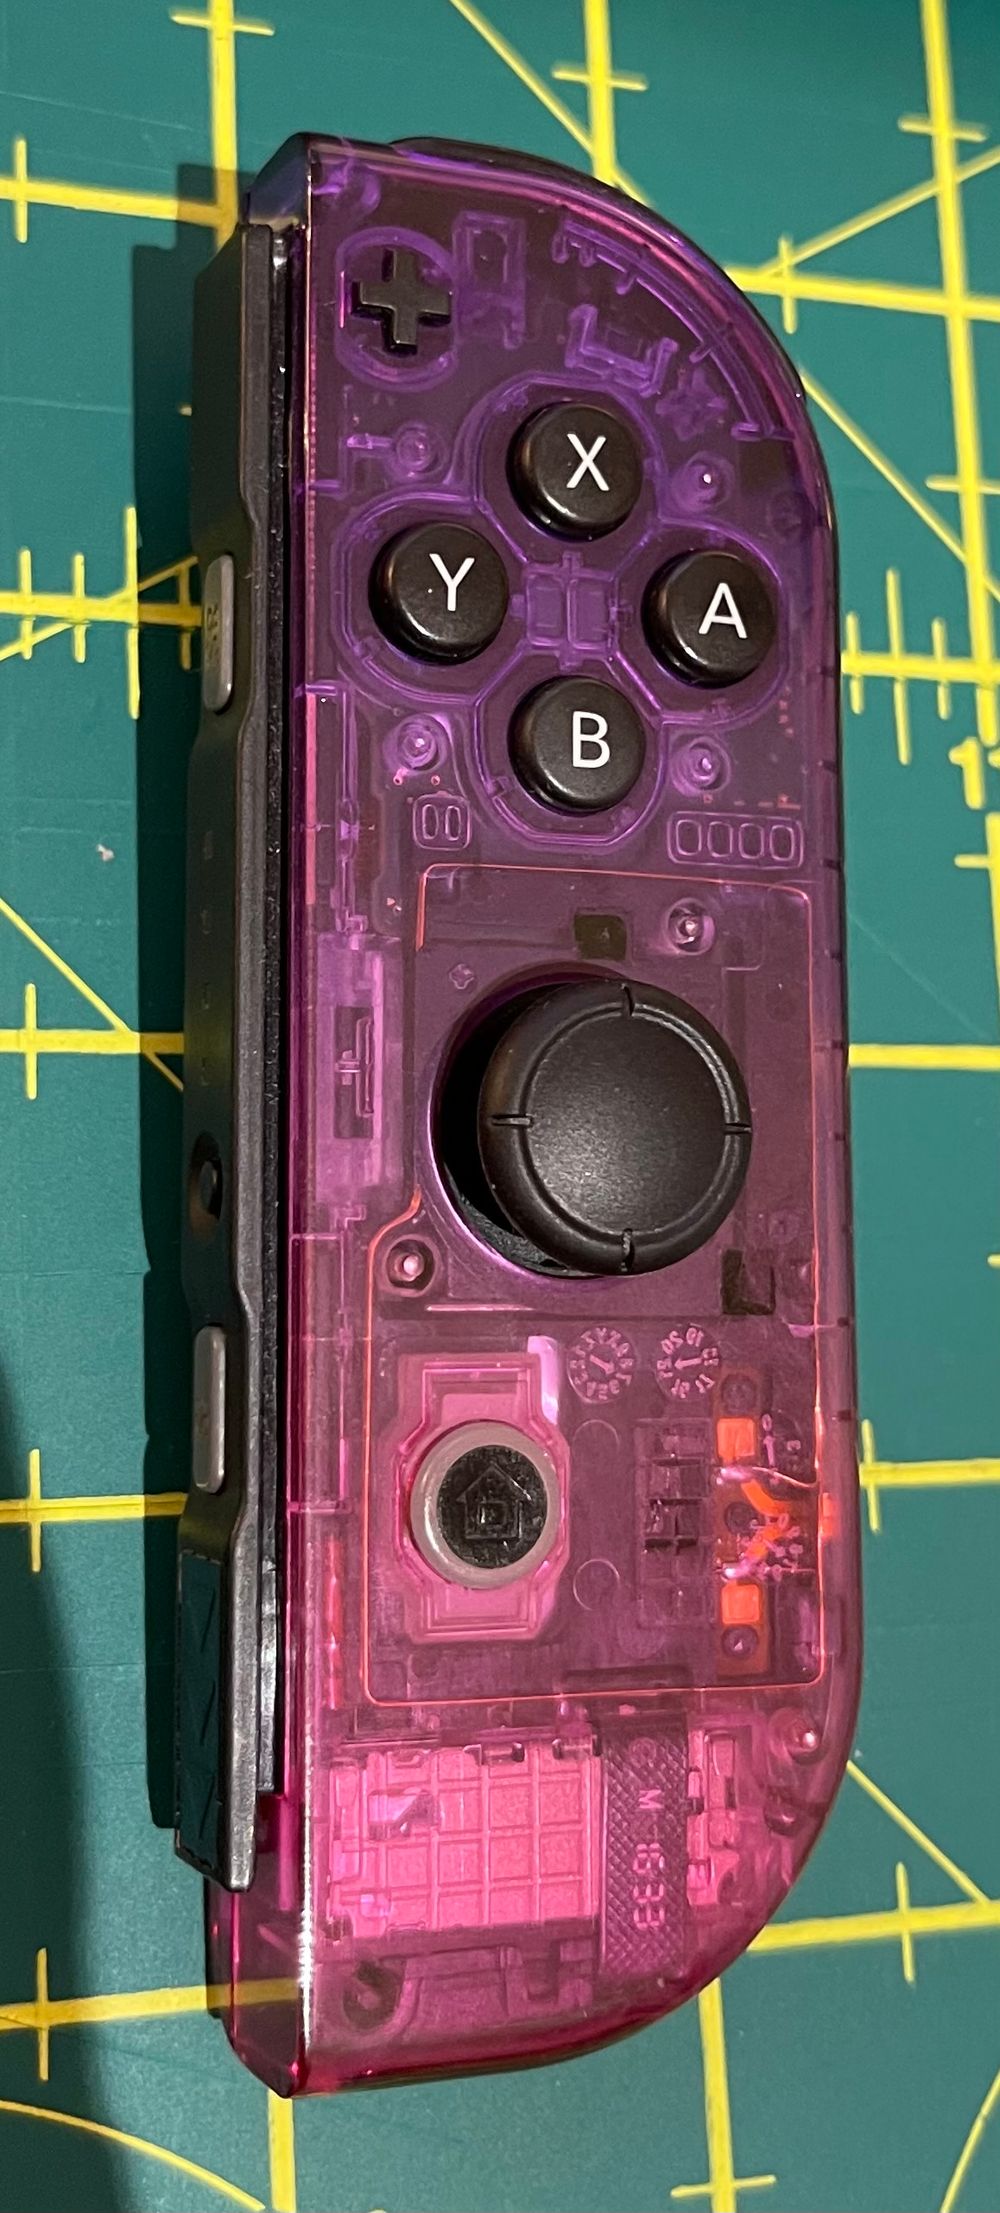 Changing the joystick and shell of the right Joycon